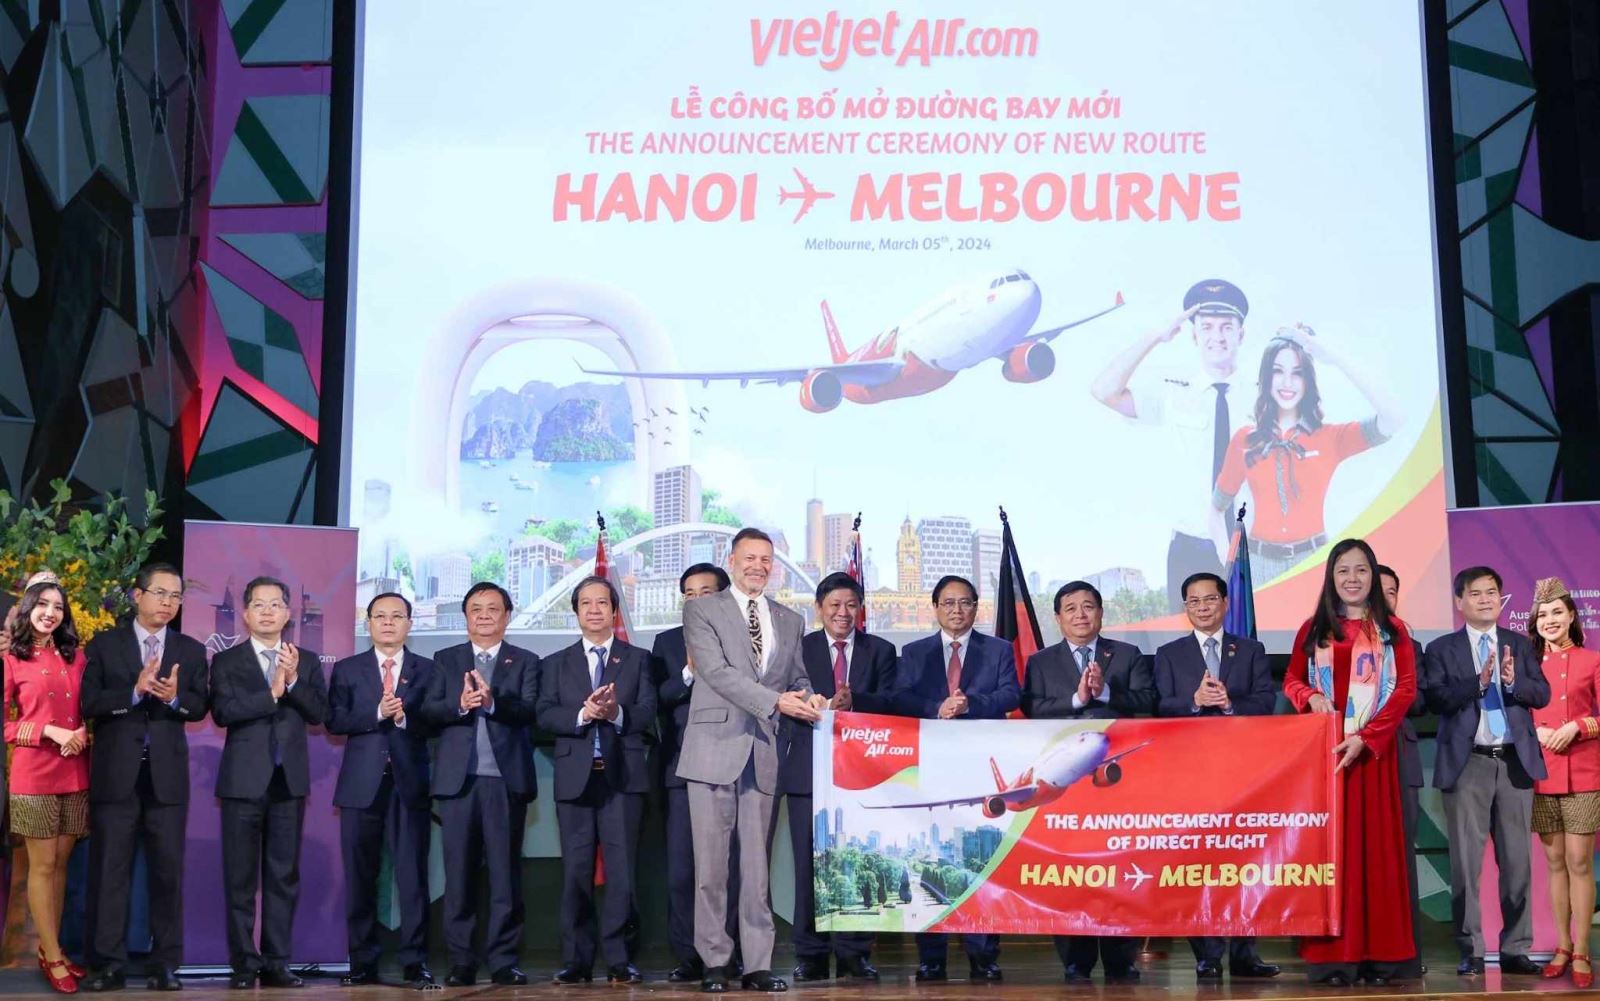 Prime Minister Pham Minh Chinh witnesses the ceremony to announce the opening of the Hanoi - Melbourne air route of Vietjet Air. (Photo: Duong Giang/Vietnam News Agency)